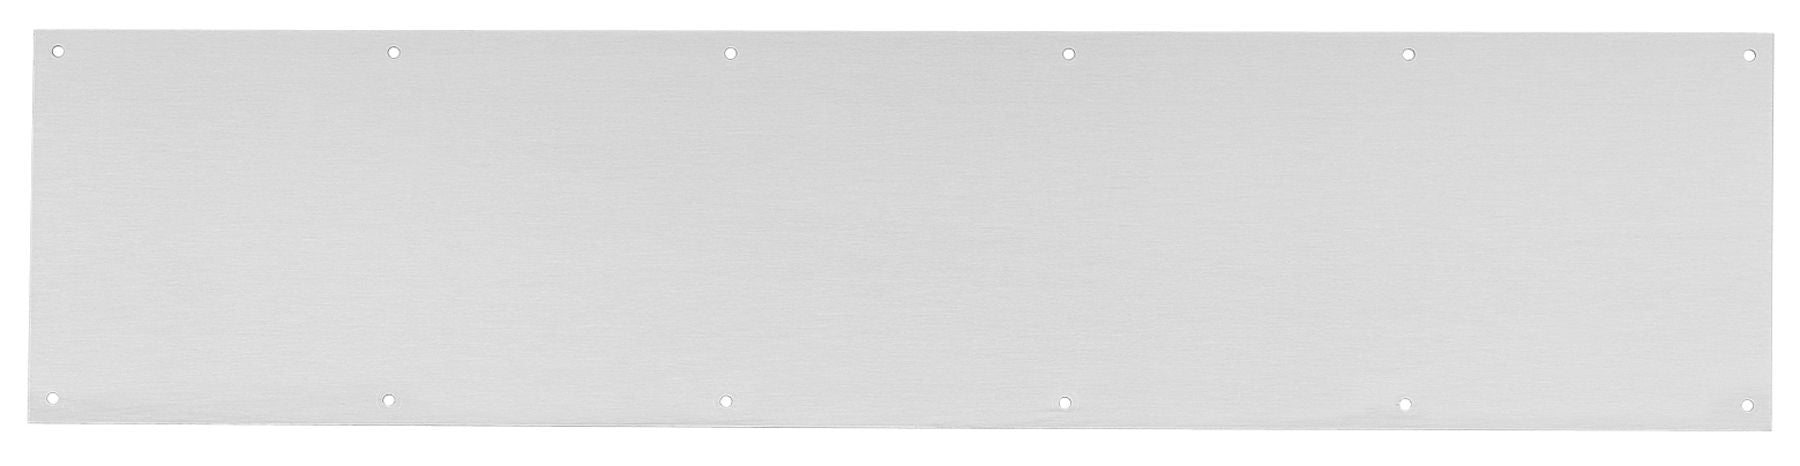 Ives Commercial 840032D842 8" x 42" Kick Plate Satin Stainless Steel Finish